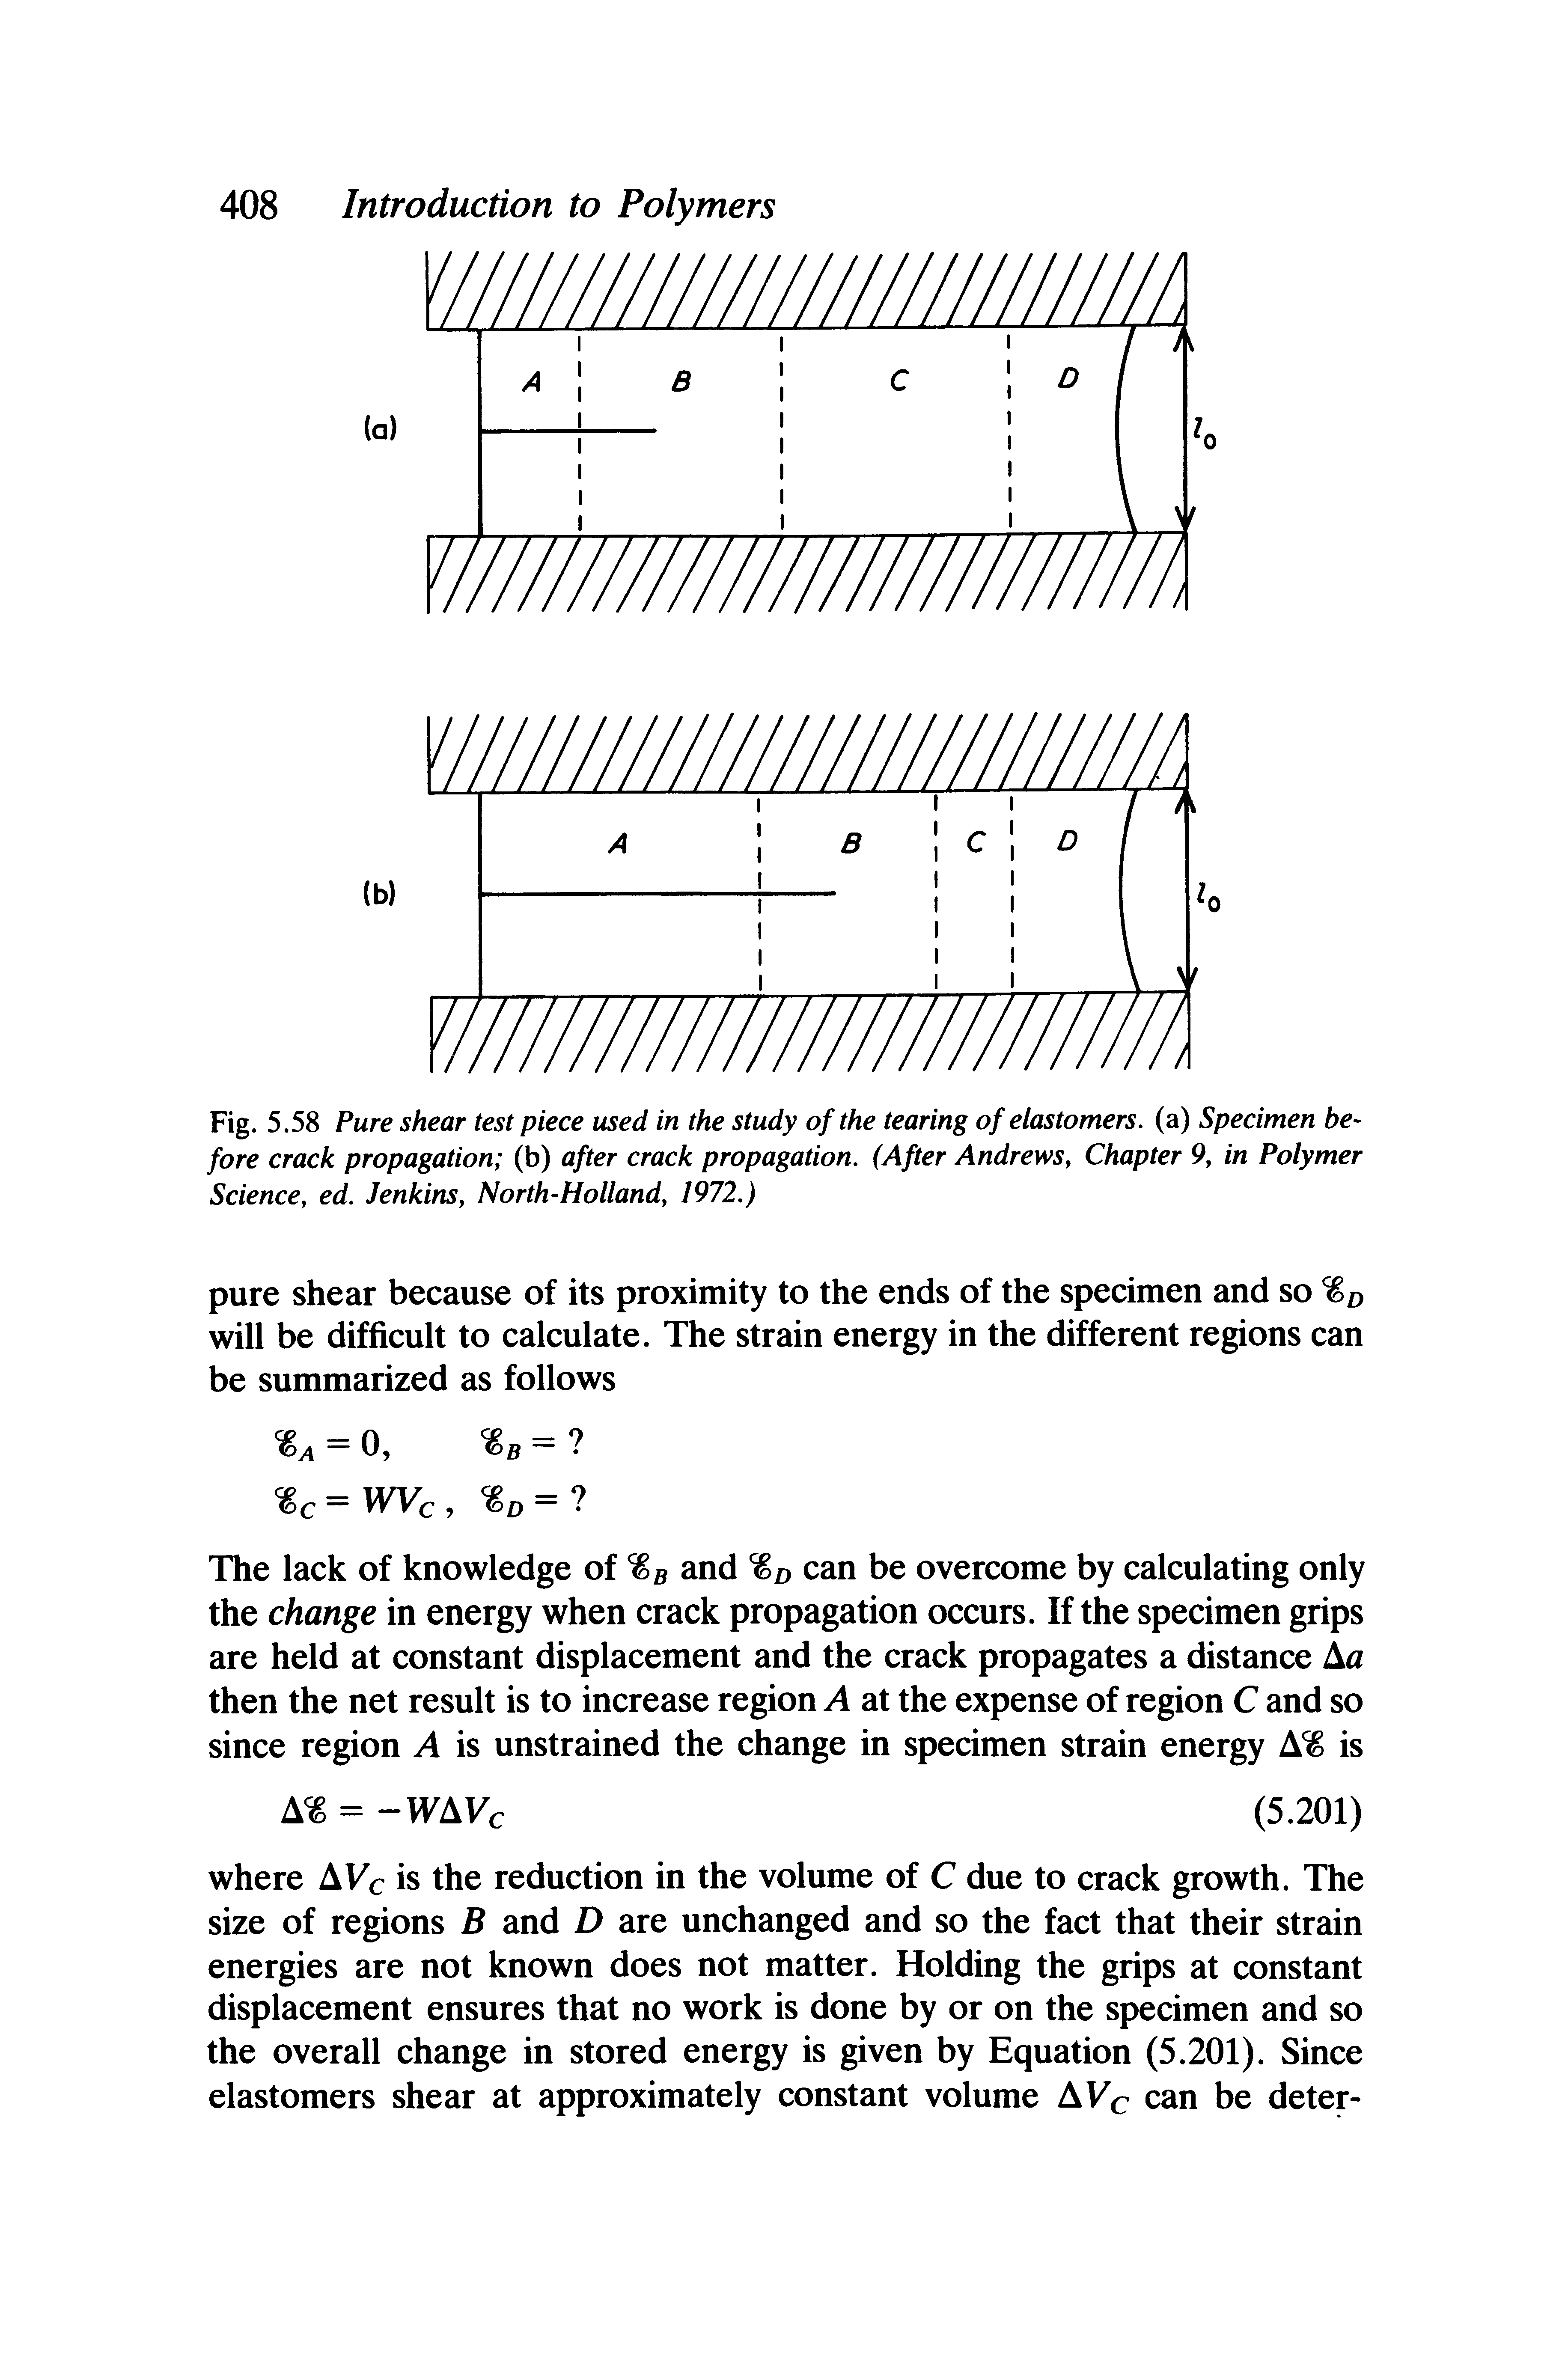 Fig. 5.58 Pure shear test piece used in the study of the tearing of elastomers, (a) Specimen before crack propagation (b) after crack propagation. (After Andrews, Chapter 9, in Polymer Science, ed. Jenkins, North-Holland, 1972.)...